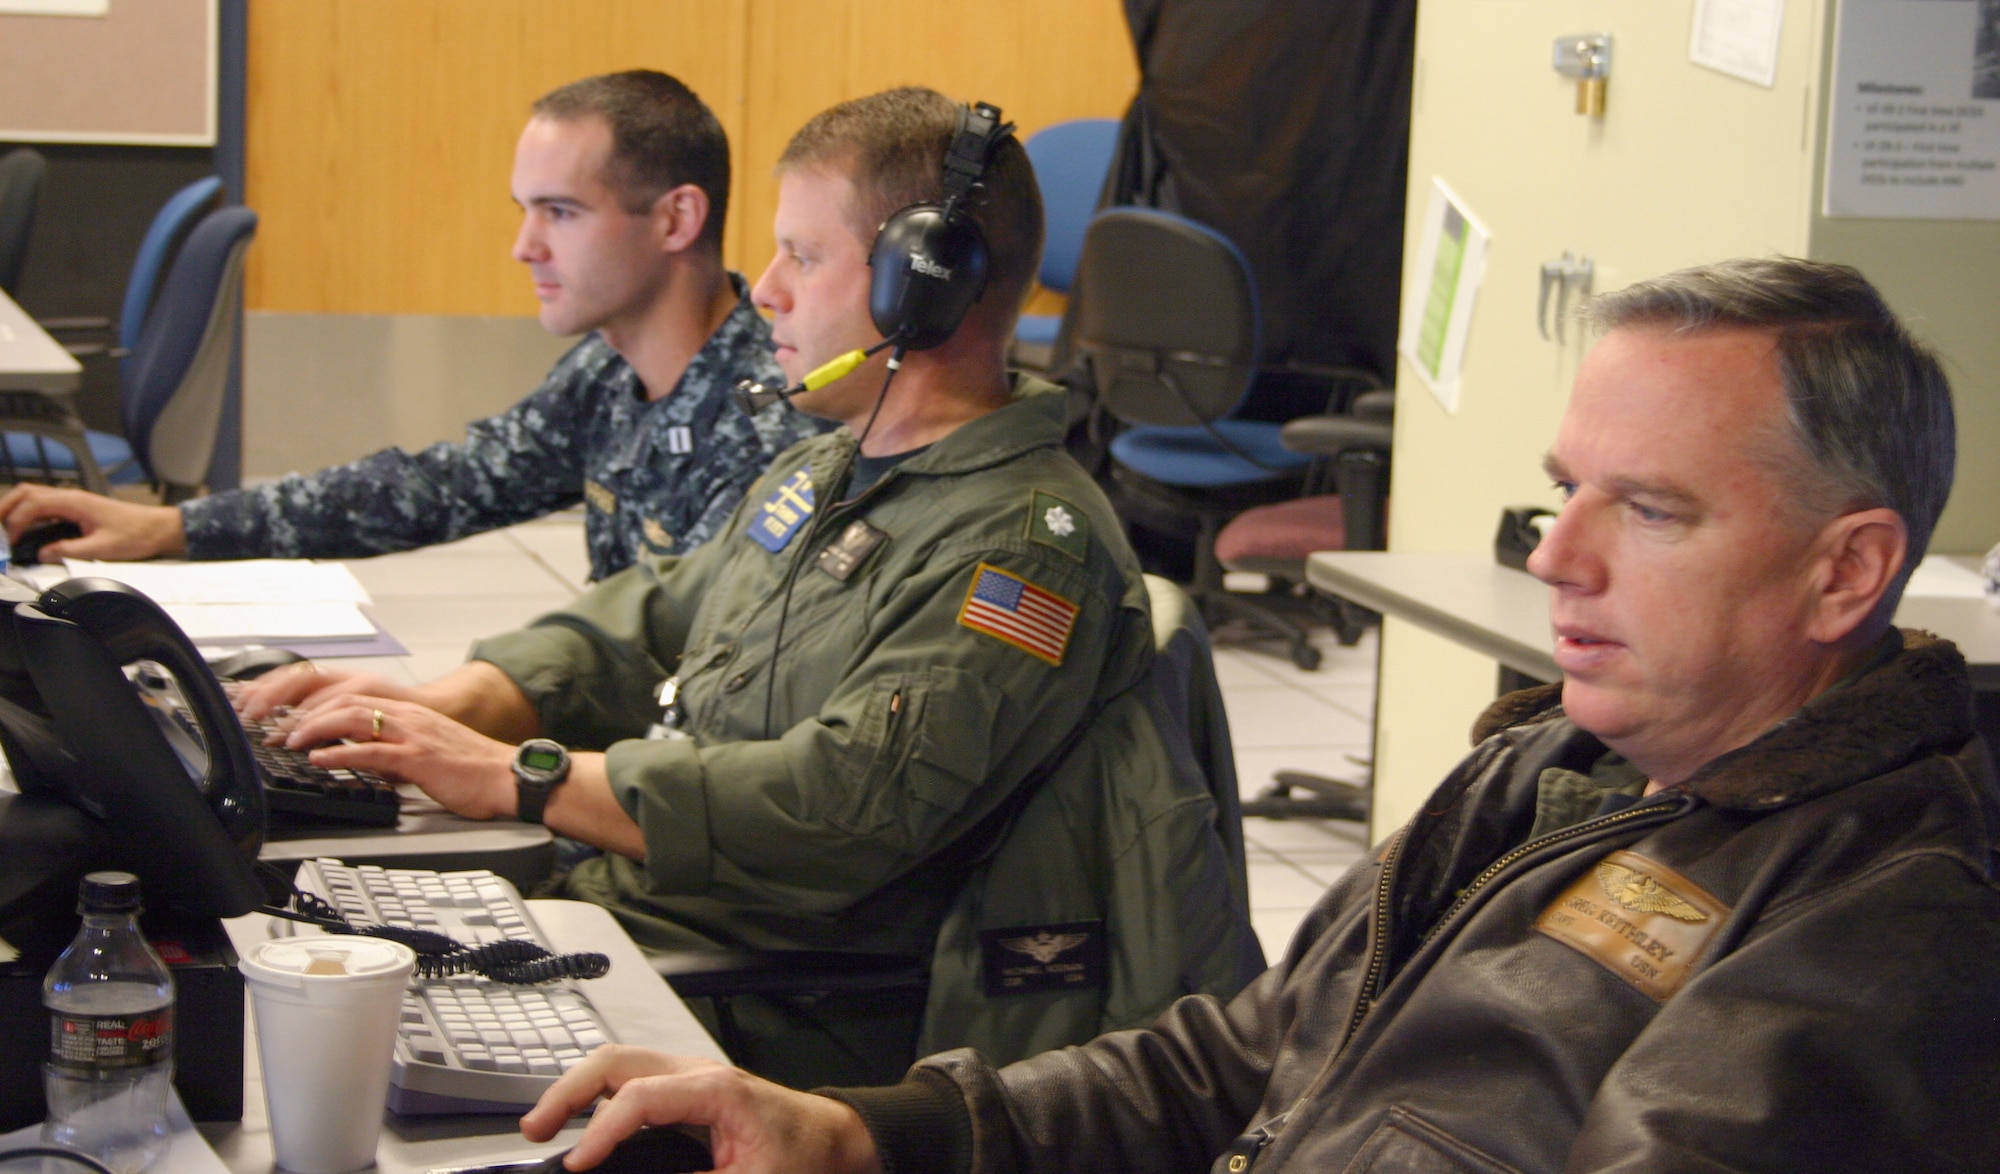 (From left) Navy Lt. Justin Sheppard, Navy Cmdr. Michael Noonan and Navy Capt. Greg Keithley, from Third Fleet stationed at San Diego, coordinate naval support in the Maritime Operating Center during Virtual Flag 11-1, hosted by the 705th Combat Training Squadron at Kirtland Air Force Base, N.M. More than 300 joint warfighters at 18 locations from Japan to England converged in a virtual battlespace for a four-day exercise ending Dec. 16, 2010. With a price tag of $2 million, it would cost 20 times that for a similar exercise with live aircraft, according to a recent 705th CTS study. (U.S. Air Force photo)